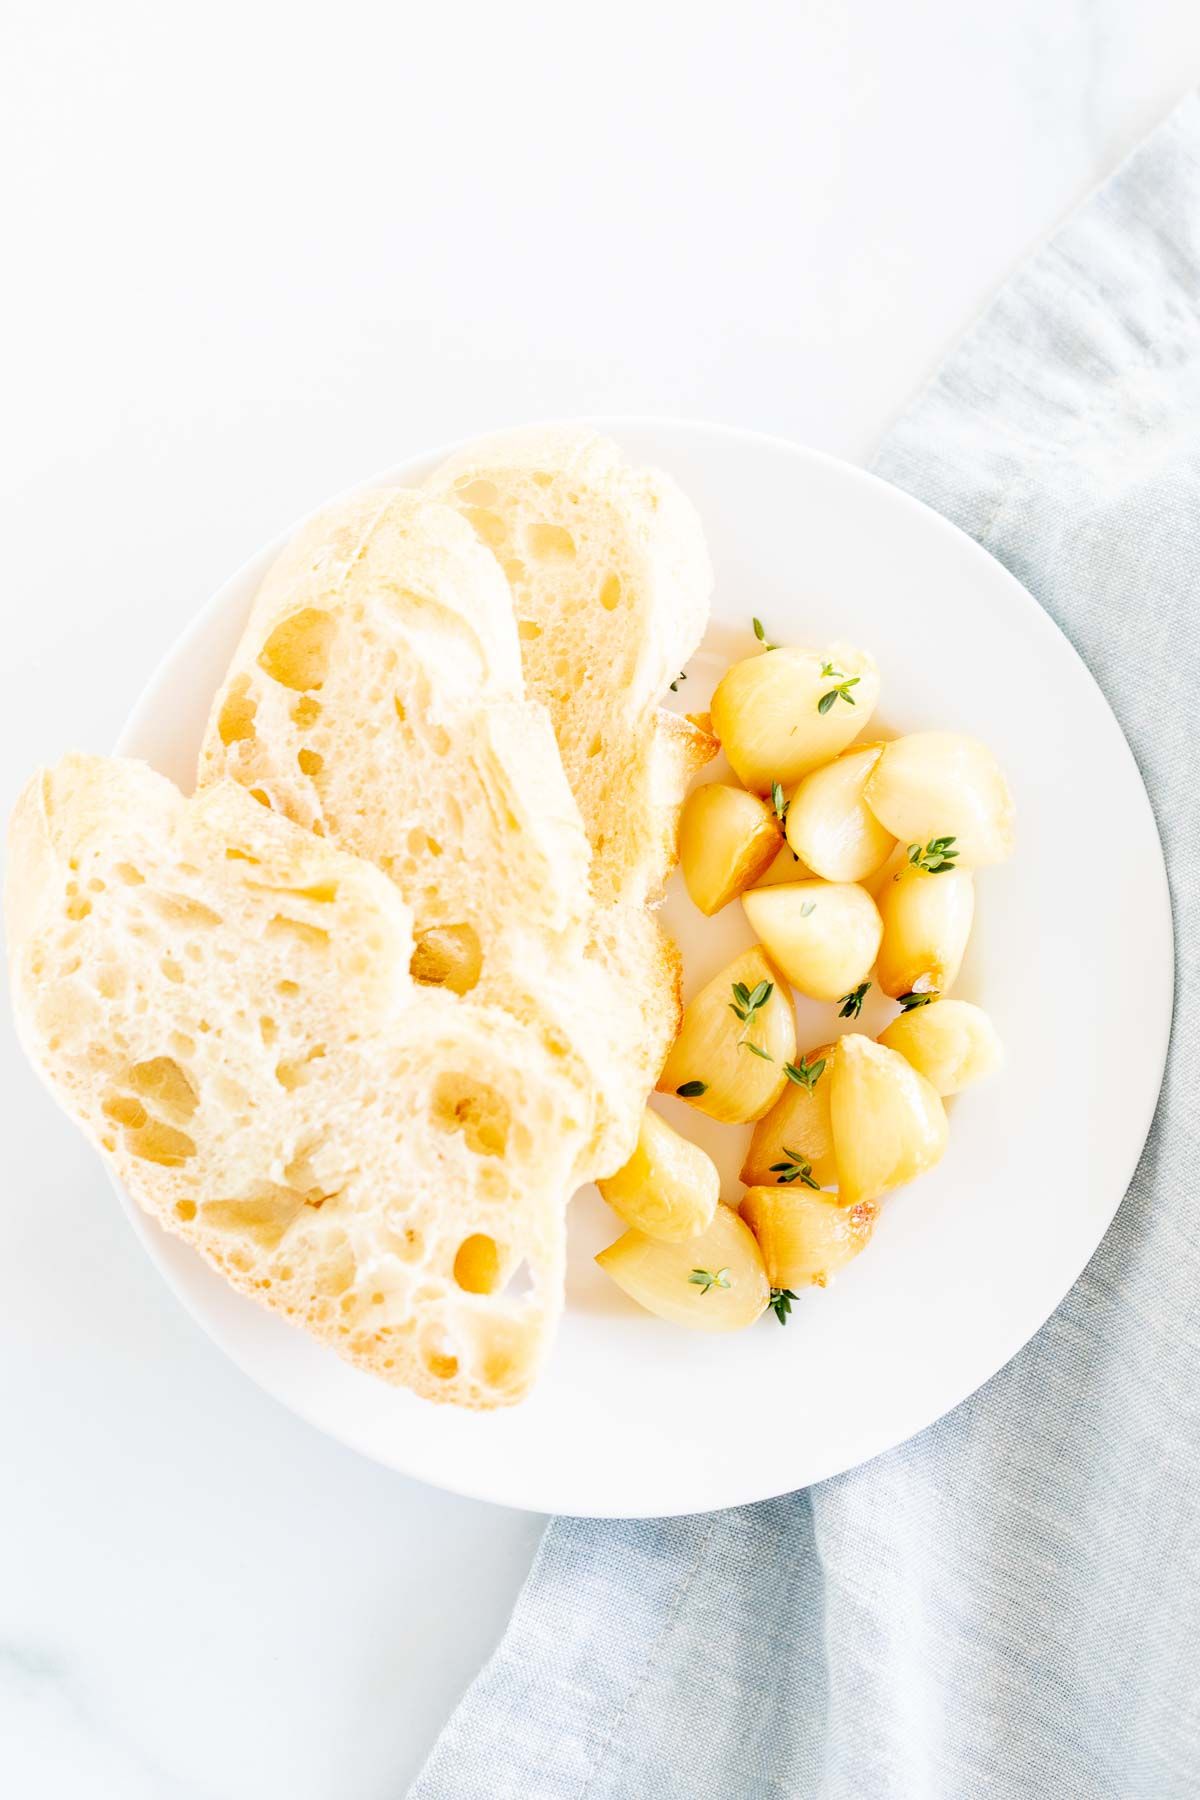 A white plate with sliced French bread and cloves of roasted garlic TeamJiX